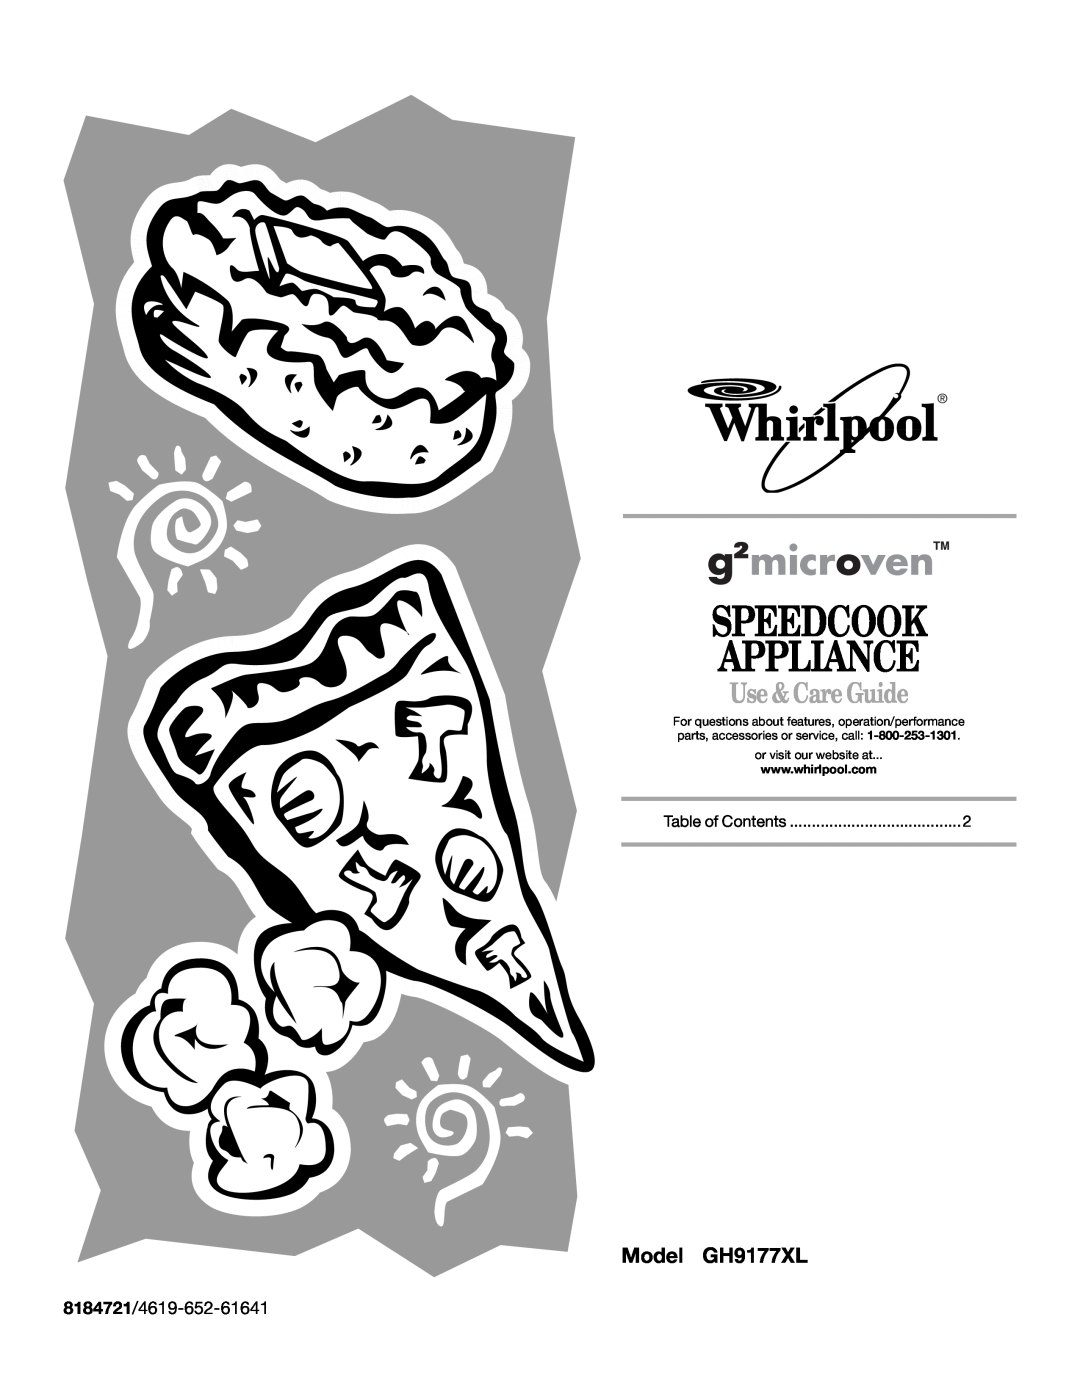 Whirlpool manual Speedcook Appliance, Use & Care Guide, Model GH9177XL, or visit our website at 